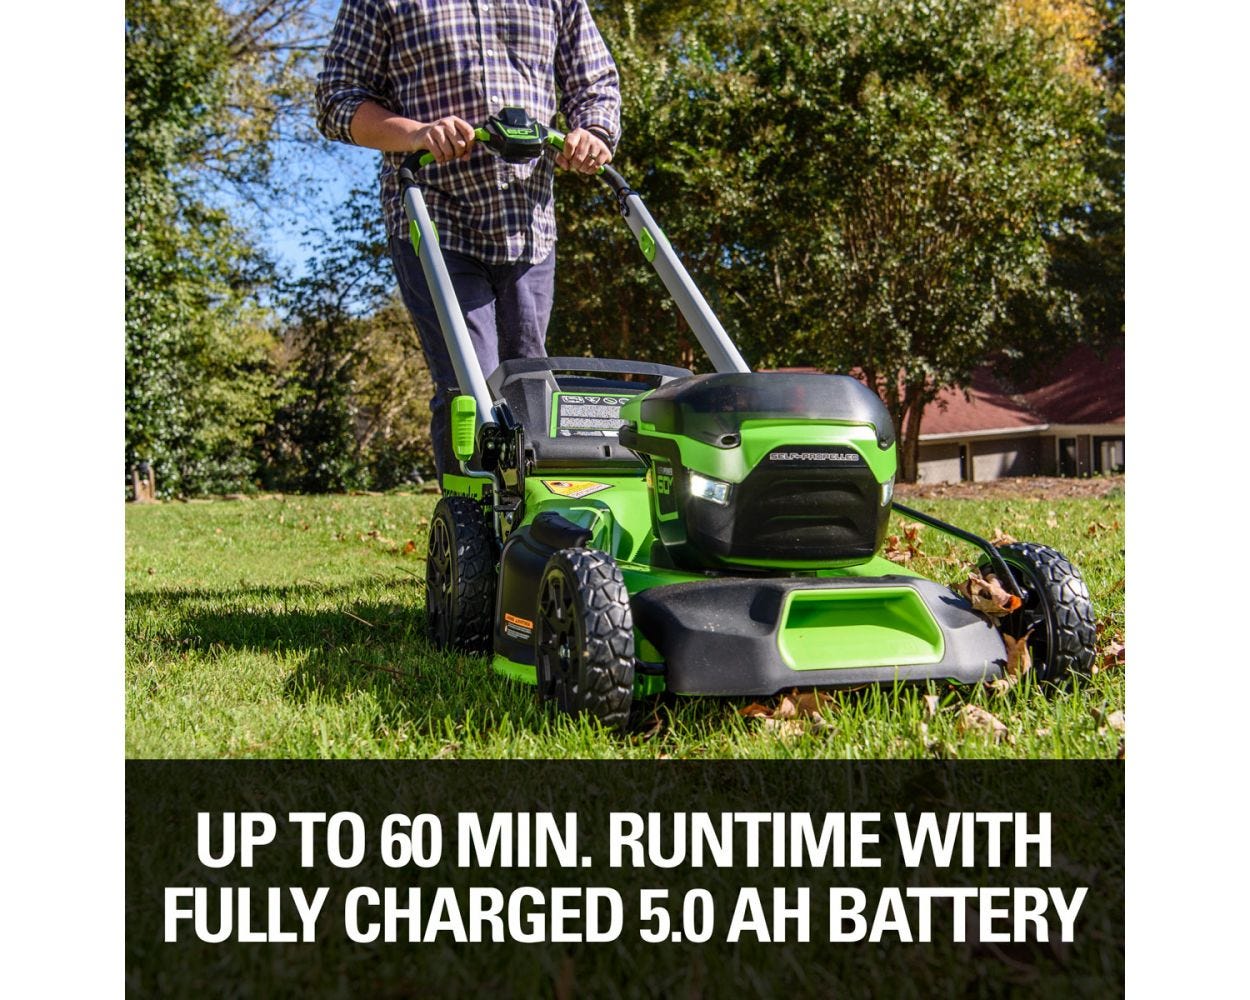 Greenworks Pro MO60L516 2531602-RC 60v Gen II Push Mower with (1) 5 Ah battery, Rapid Charger + AI Handles + LED - Refurbished